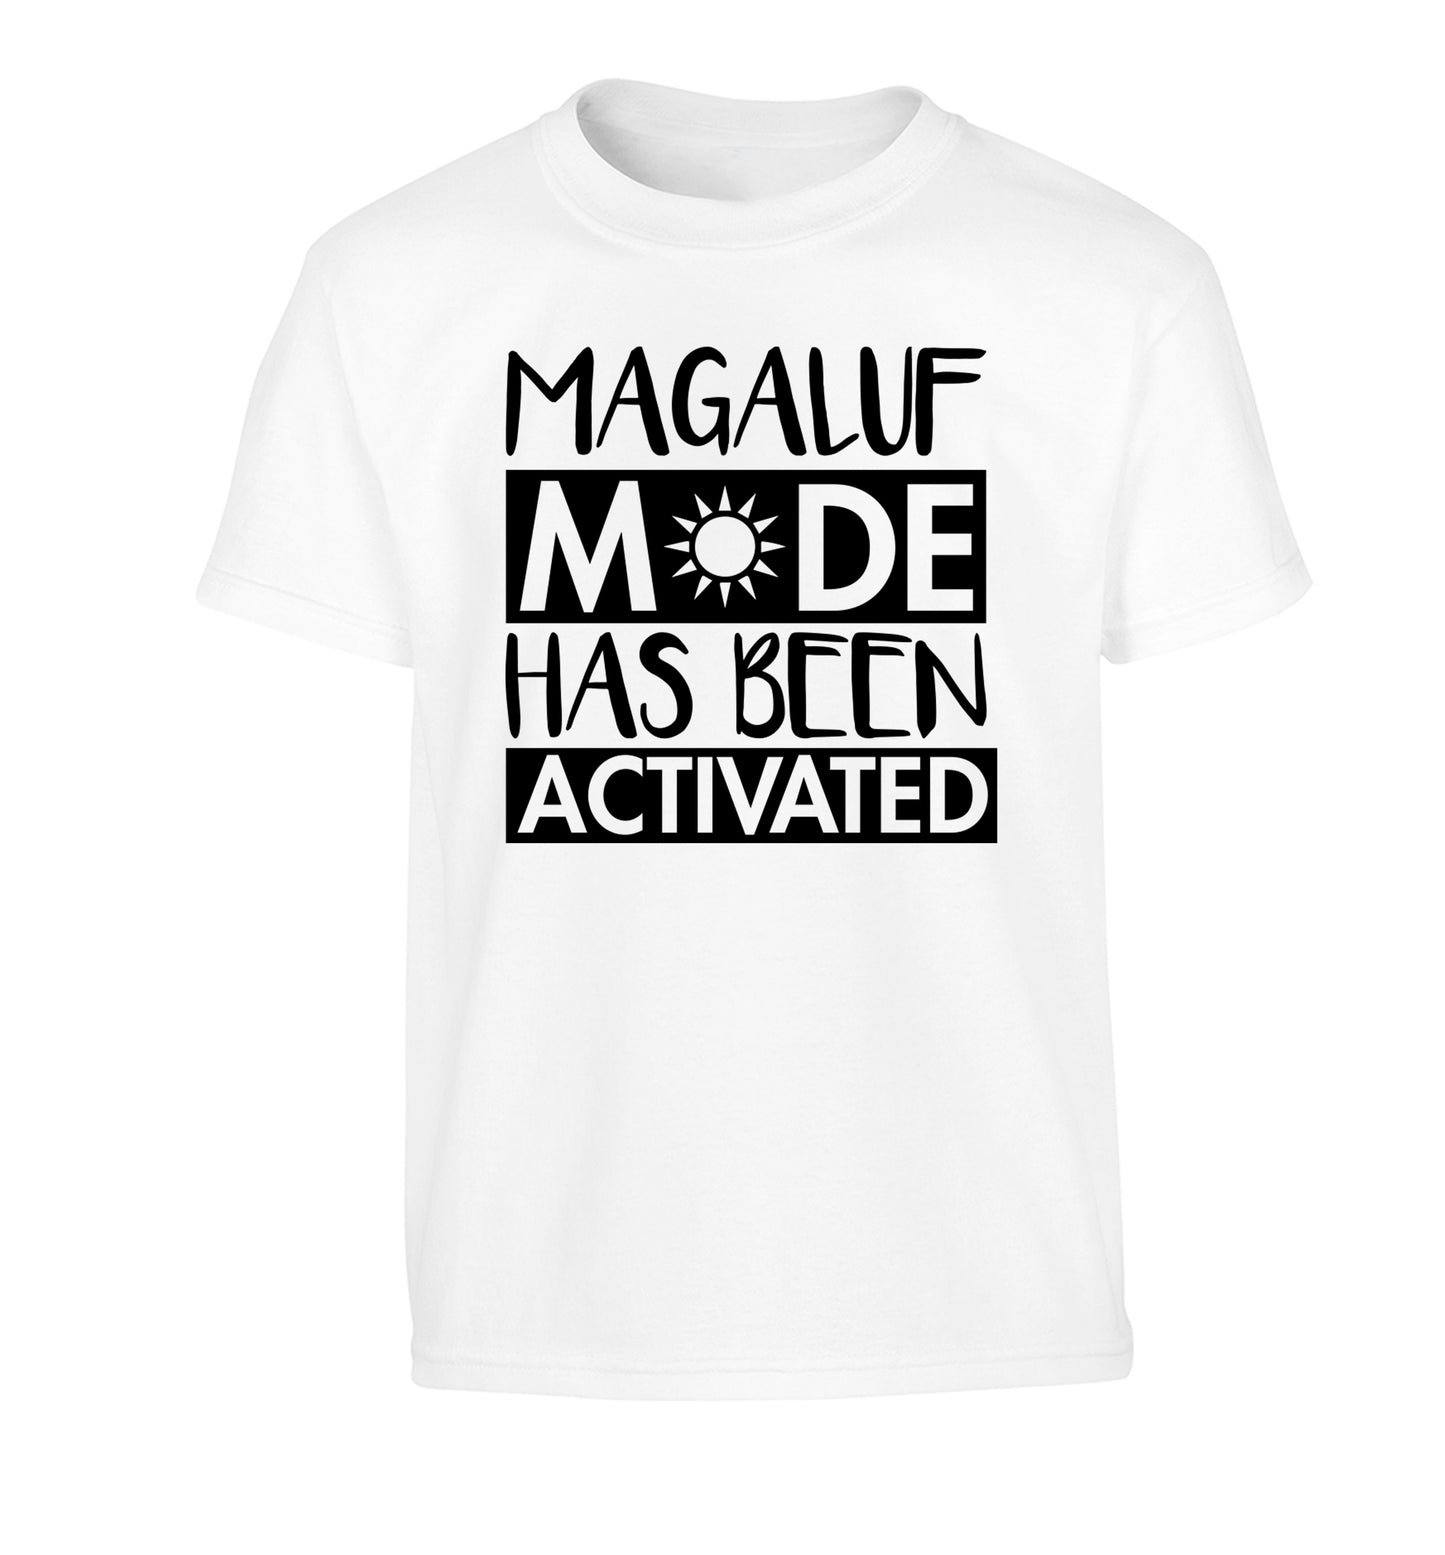 Magaluf mode has been activated Children's white Tshirt 12-13 Years